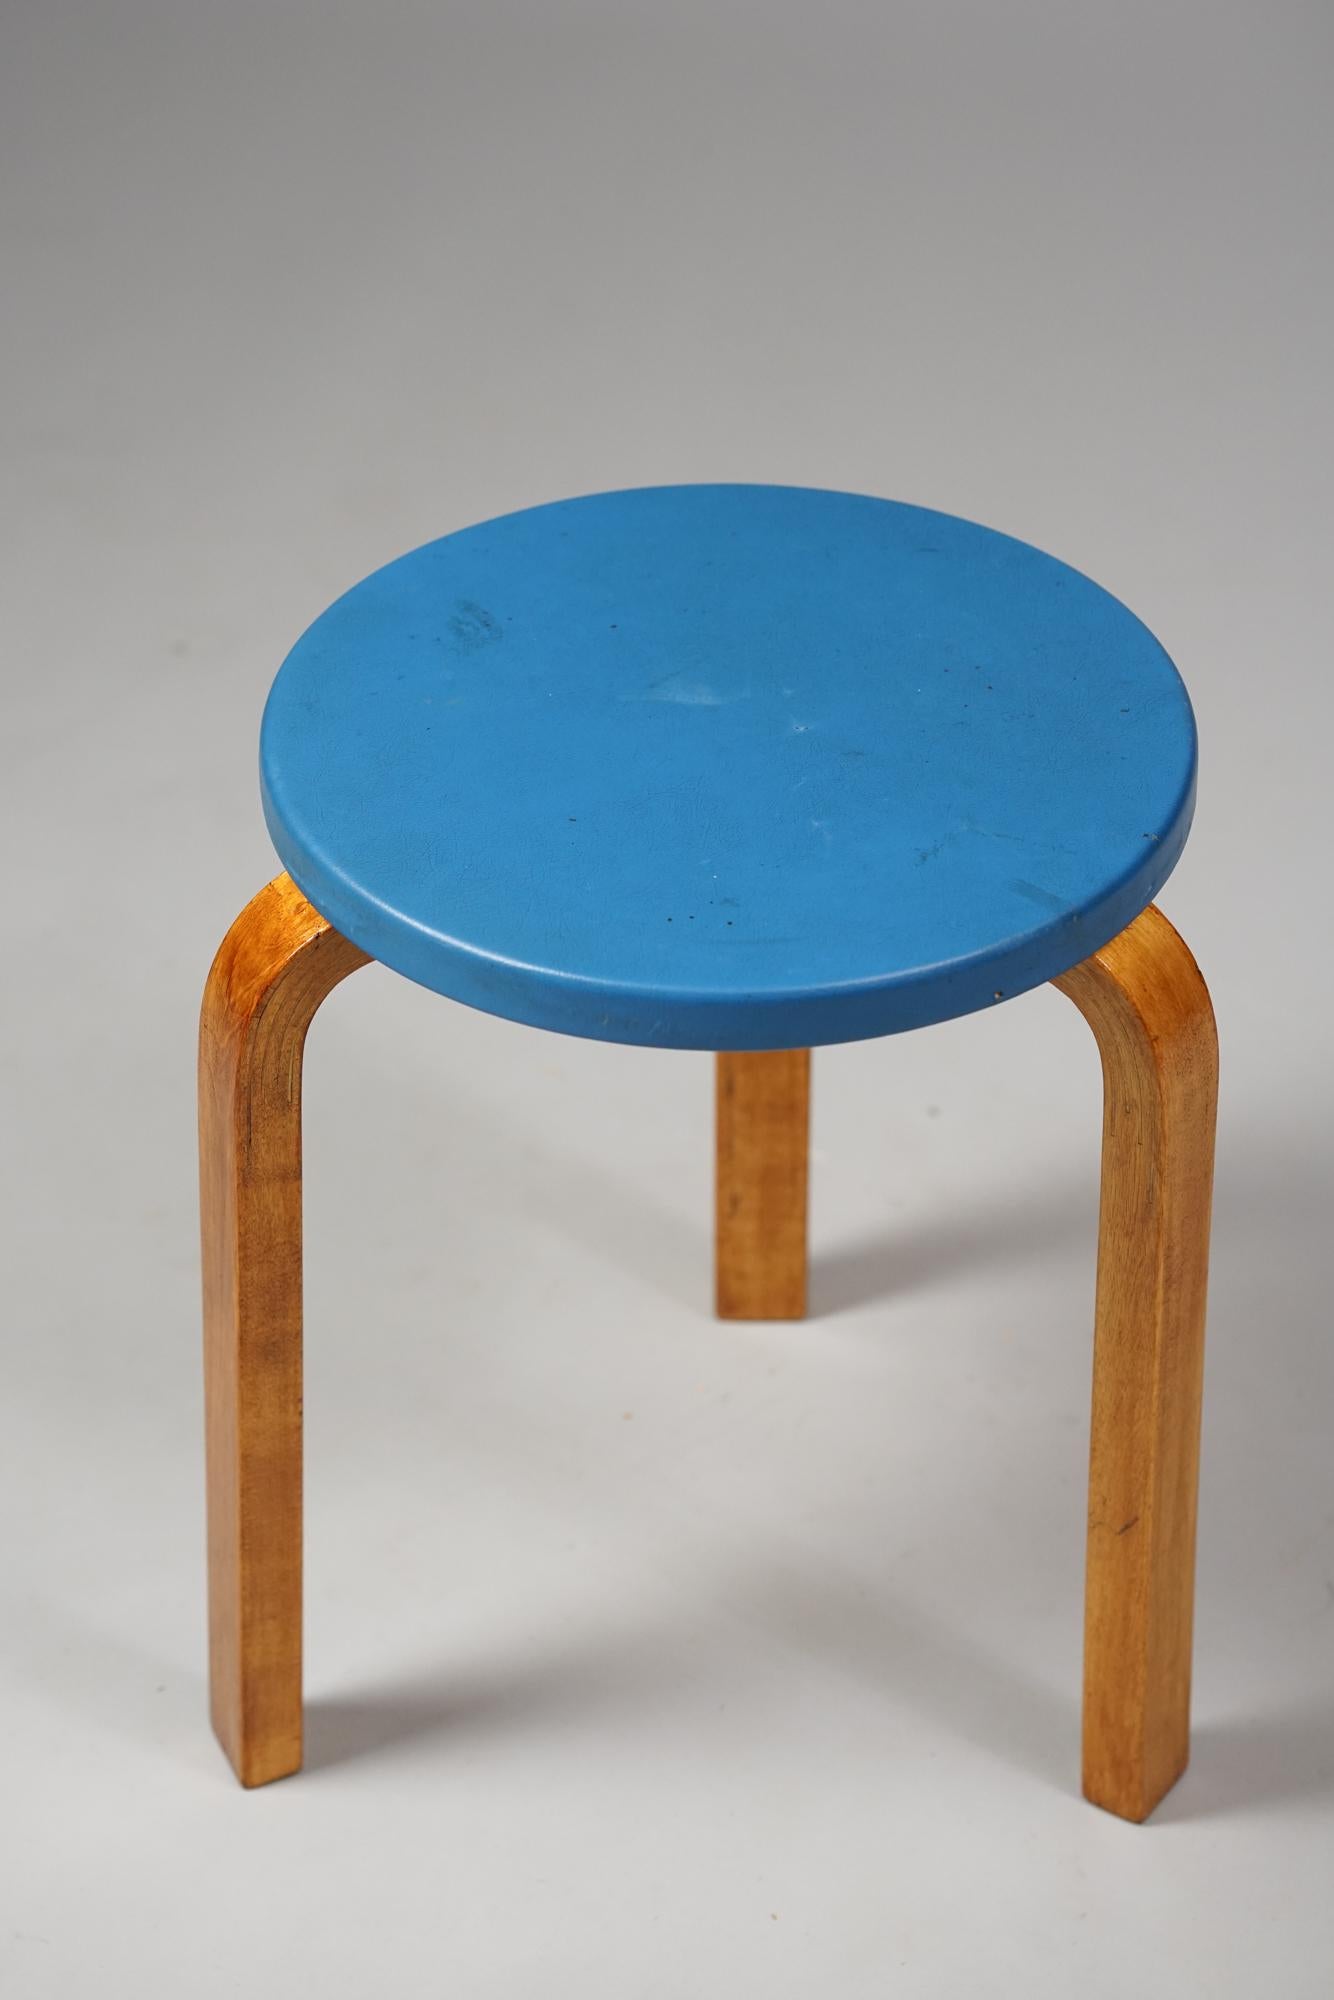 Stool model 60 by Alvar Aalto for Artek from the 1950s. Birch with rare color imitation leather. Good vintage condition, patina and wear consistent with age and use. Beautiful honey colored patina on the birch parts. Iconic Alvar Aalto design. 